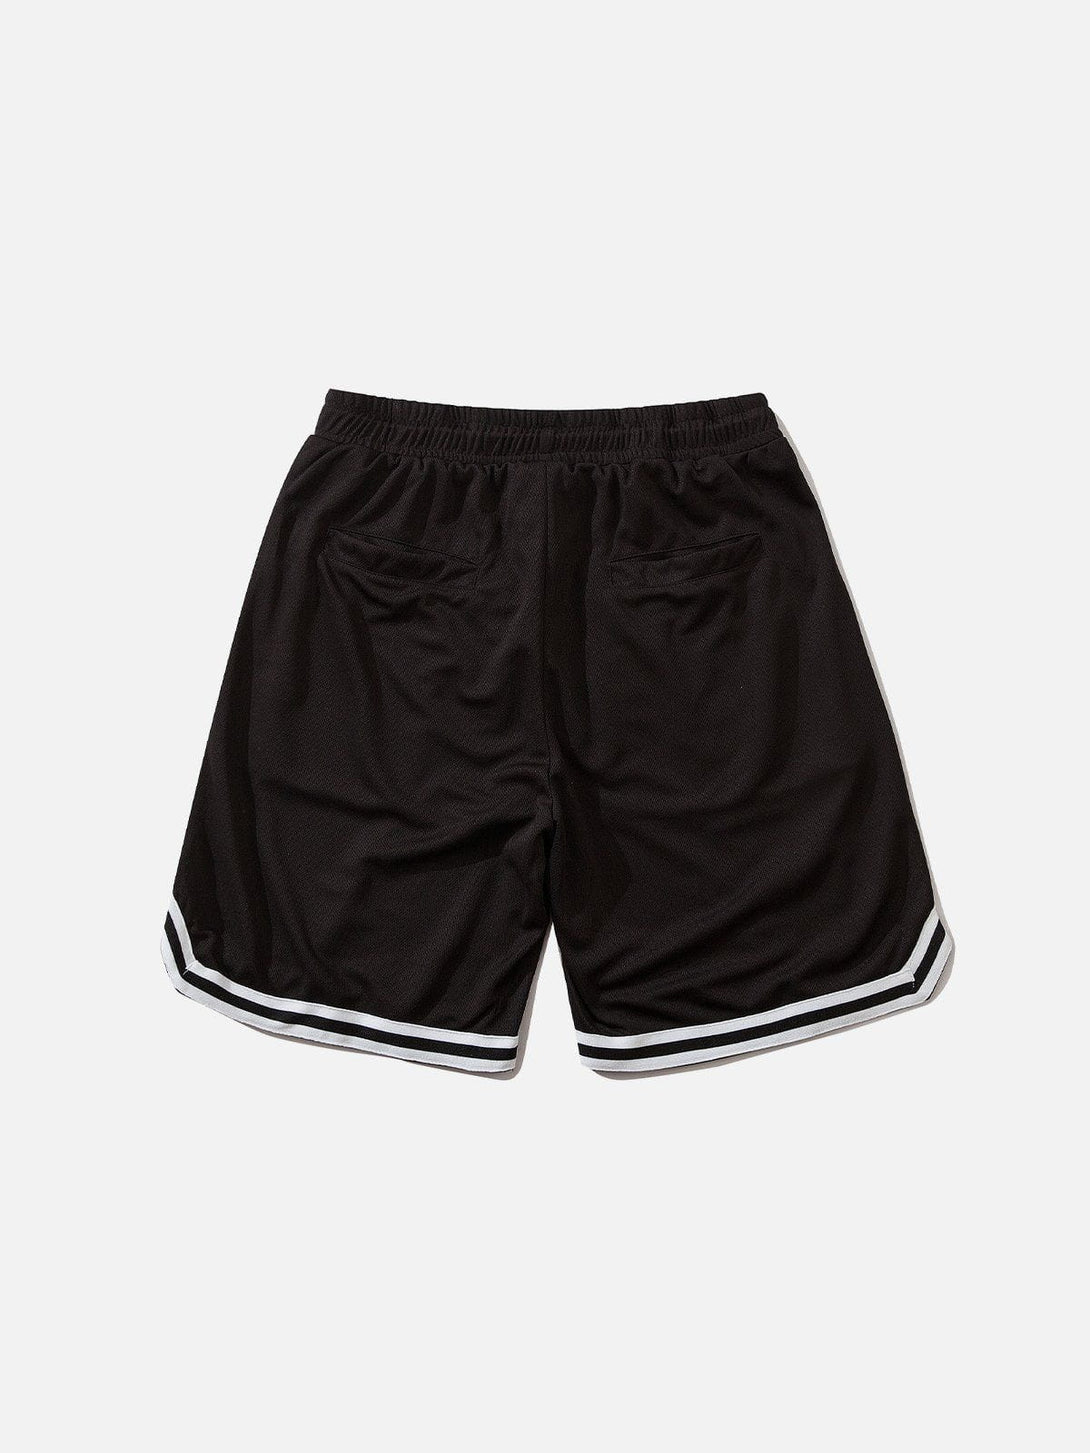 Levefly - Applique Embroidery Stripes Shorts - Streetwear Fashion - levefly.com